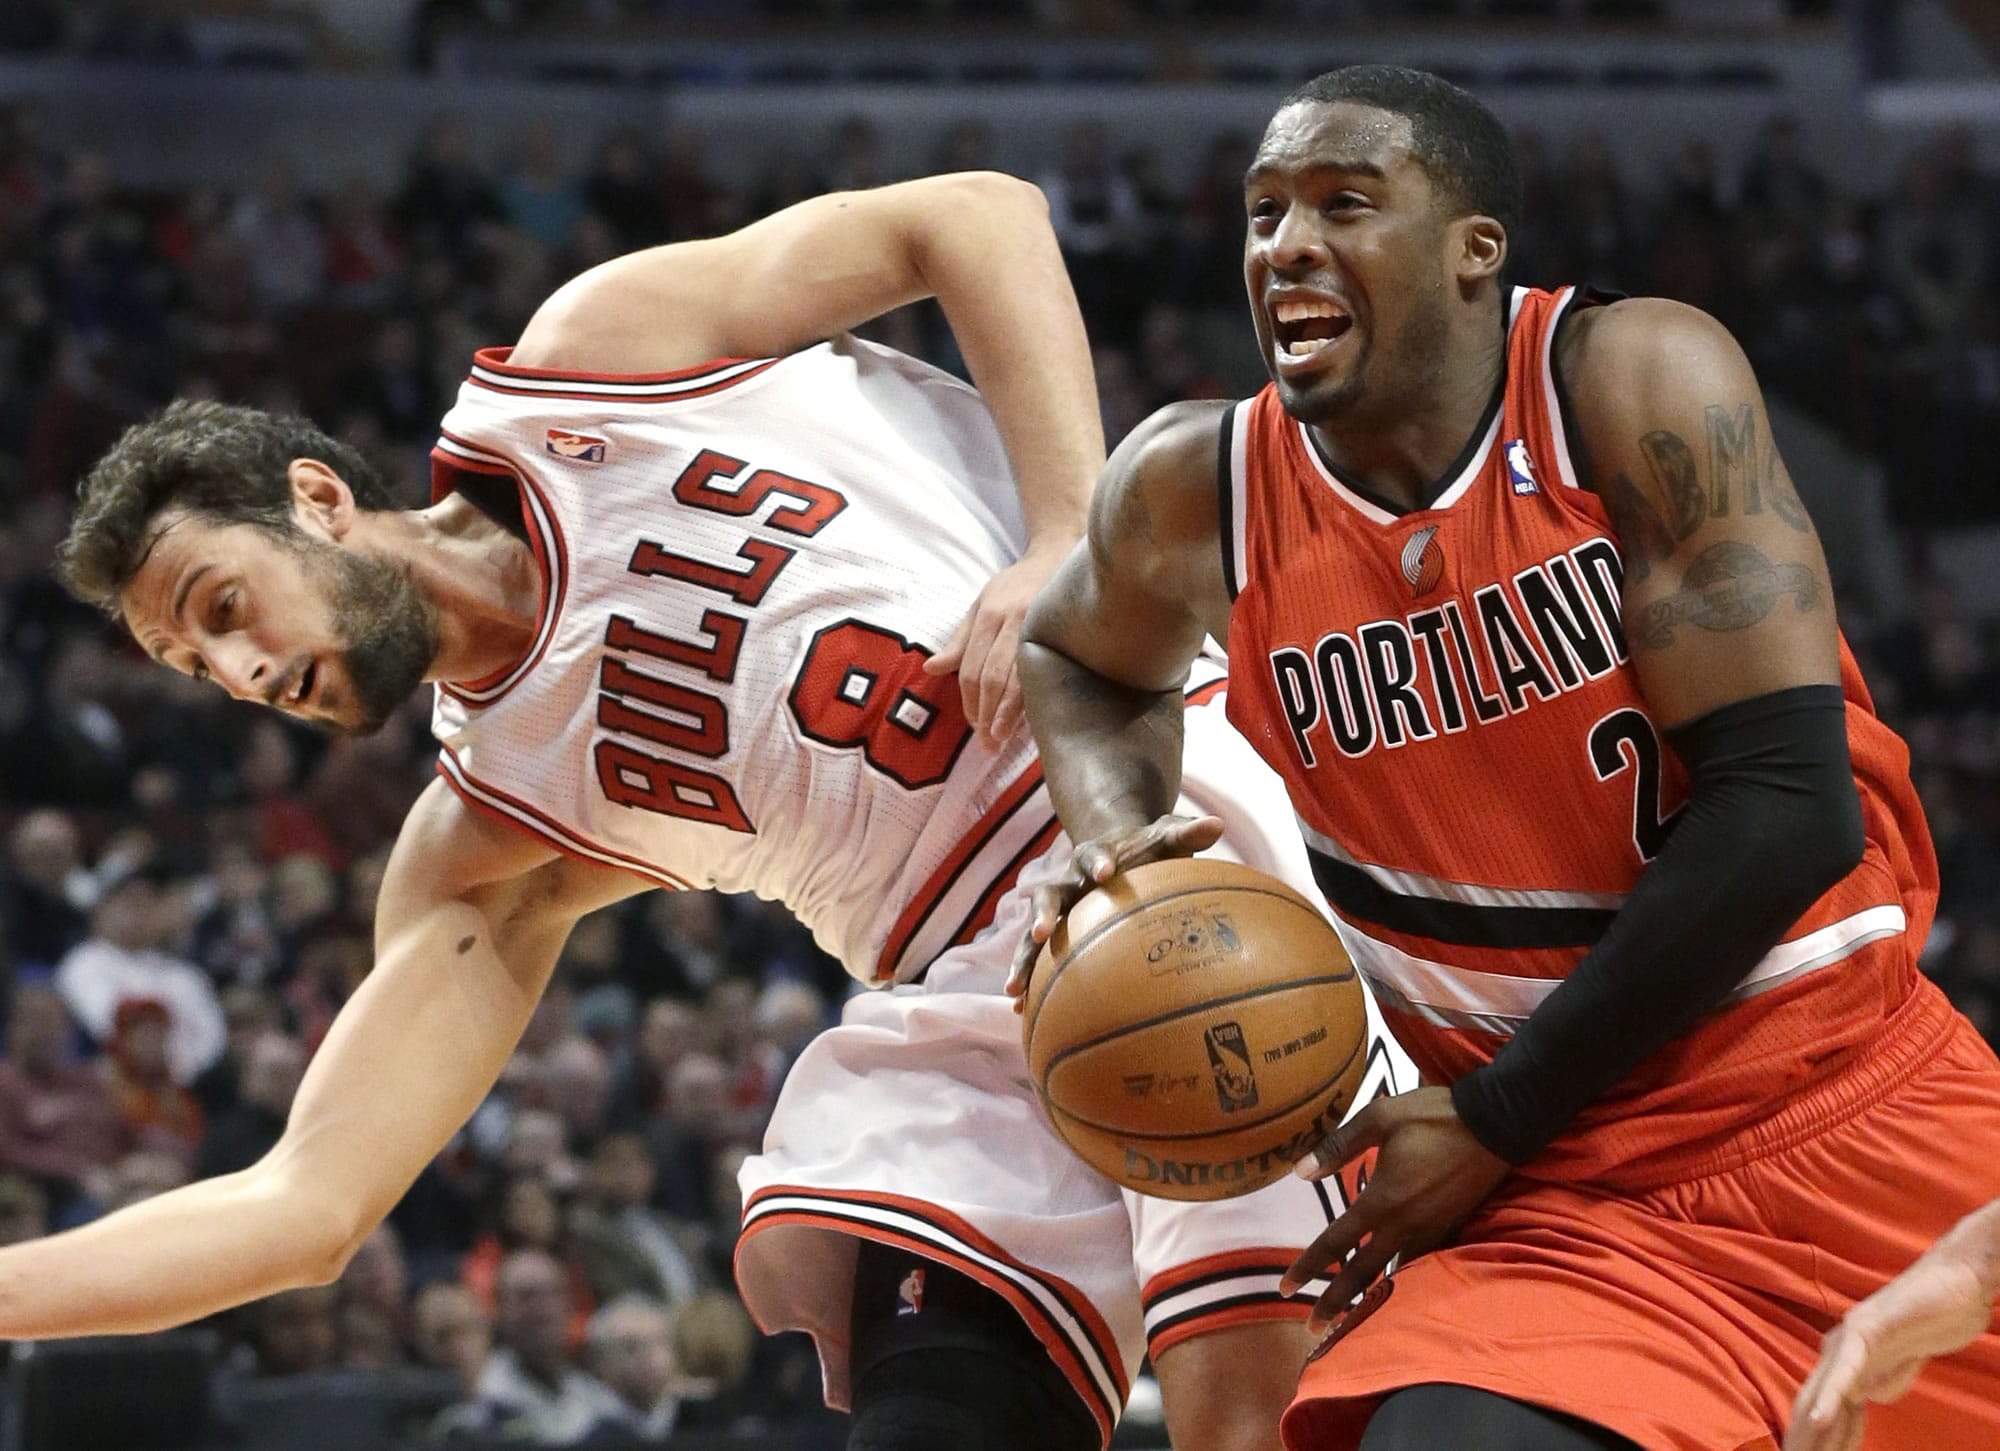 Portland Trail Blazers guard Wesley Matthews, right, drives to the basket past Chicago Bulls guard Marco Belinelli, of Italy, during the first half of an NBA basketball game in Chicago on Thursday, March 21, 2013. (AP Photo/Nam Y.